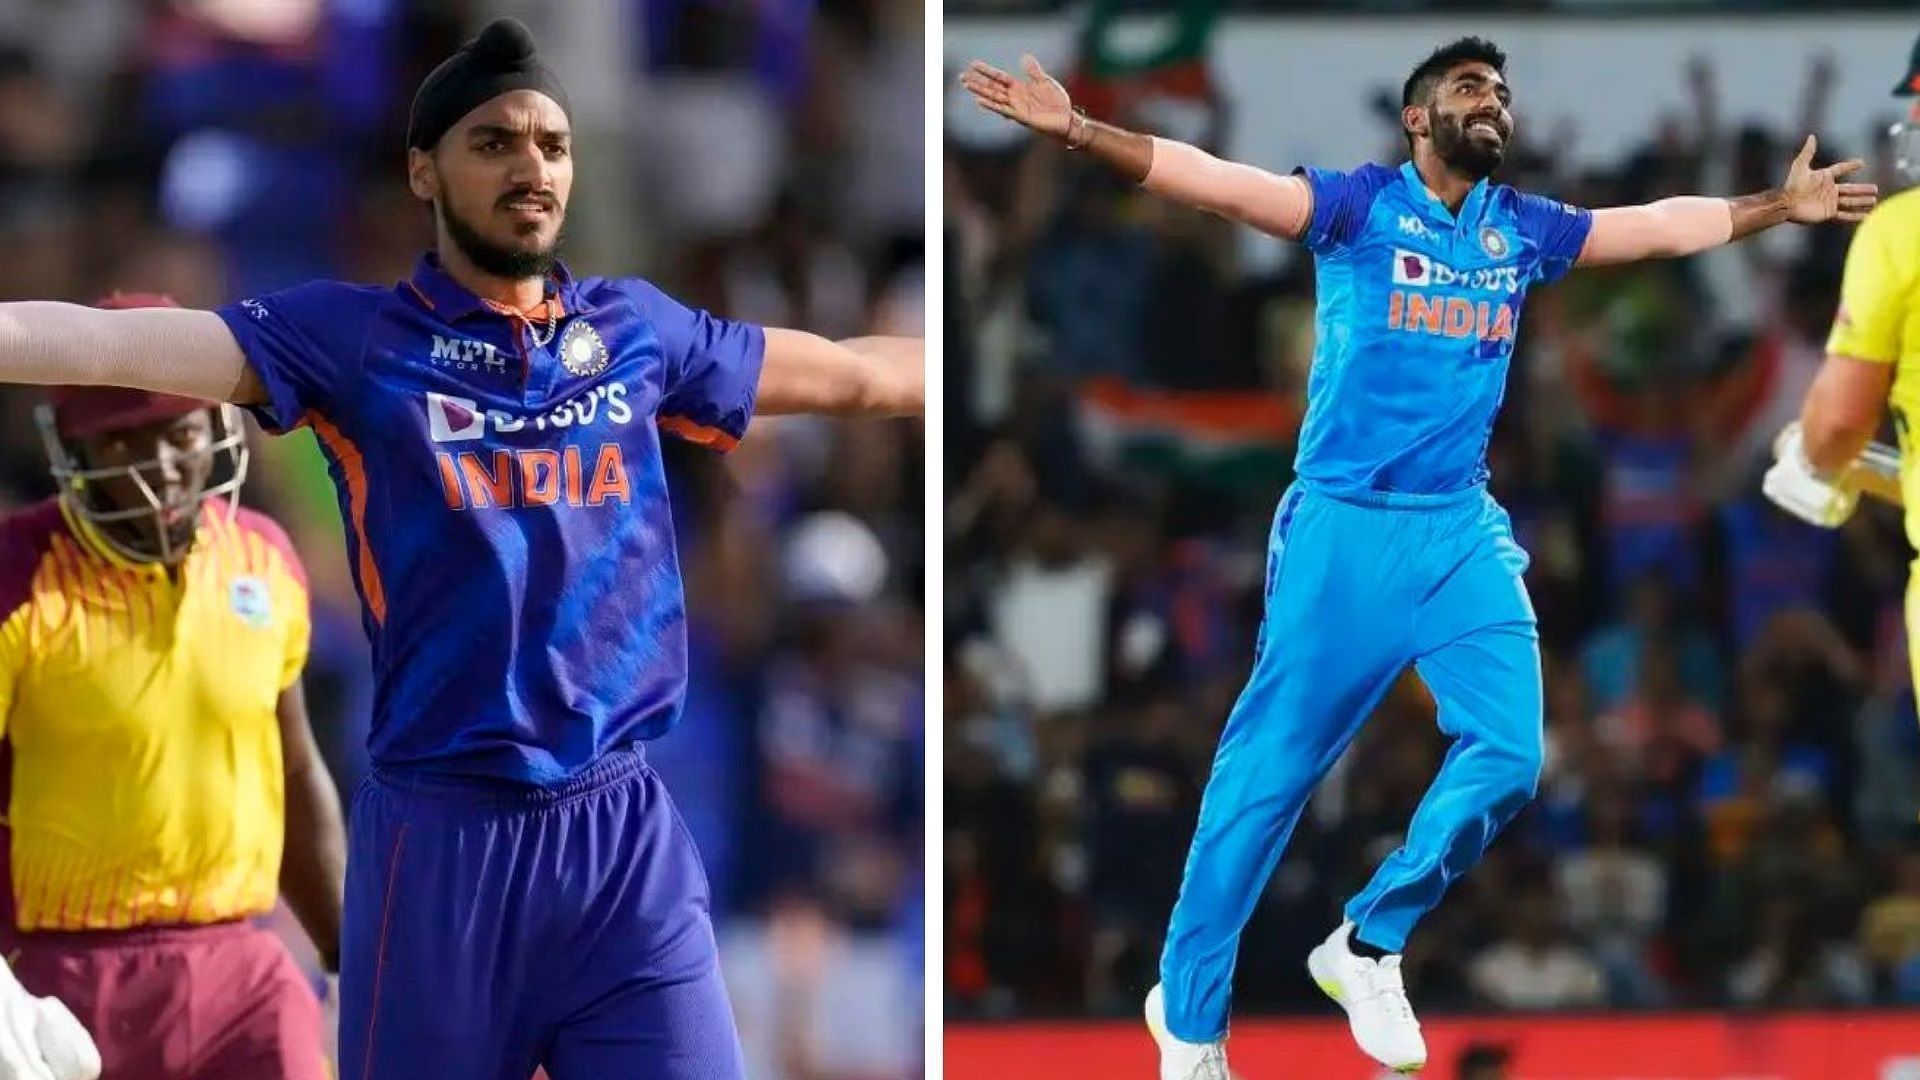 Arshdeep Singh and Jasprit Bumrah will likely share the new ball. [P/C: Twitter]